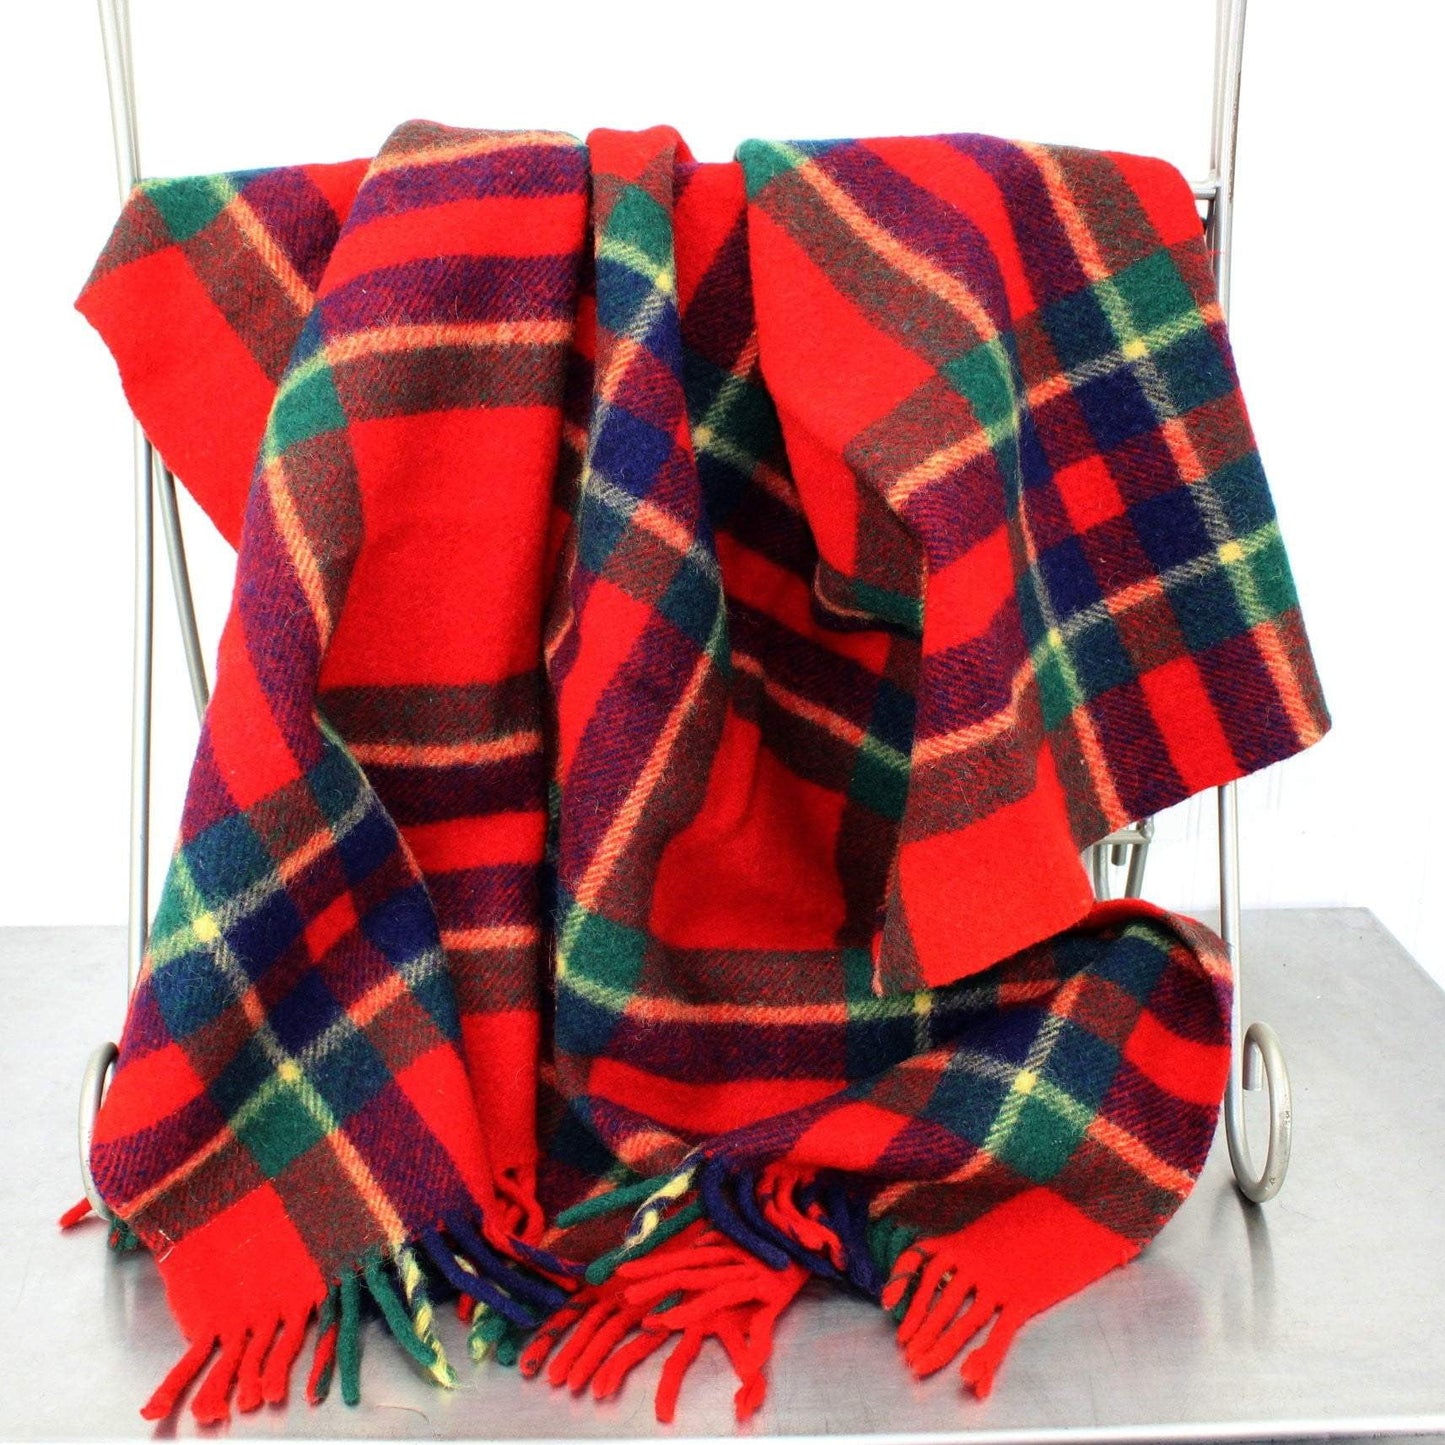 Troy Robe USA Wool Throw - Leisure Blanket Red Plaid Green Blue vintage mill clossed 2001